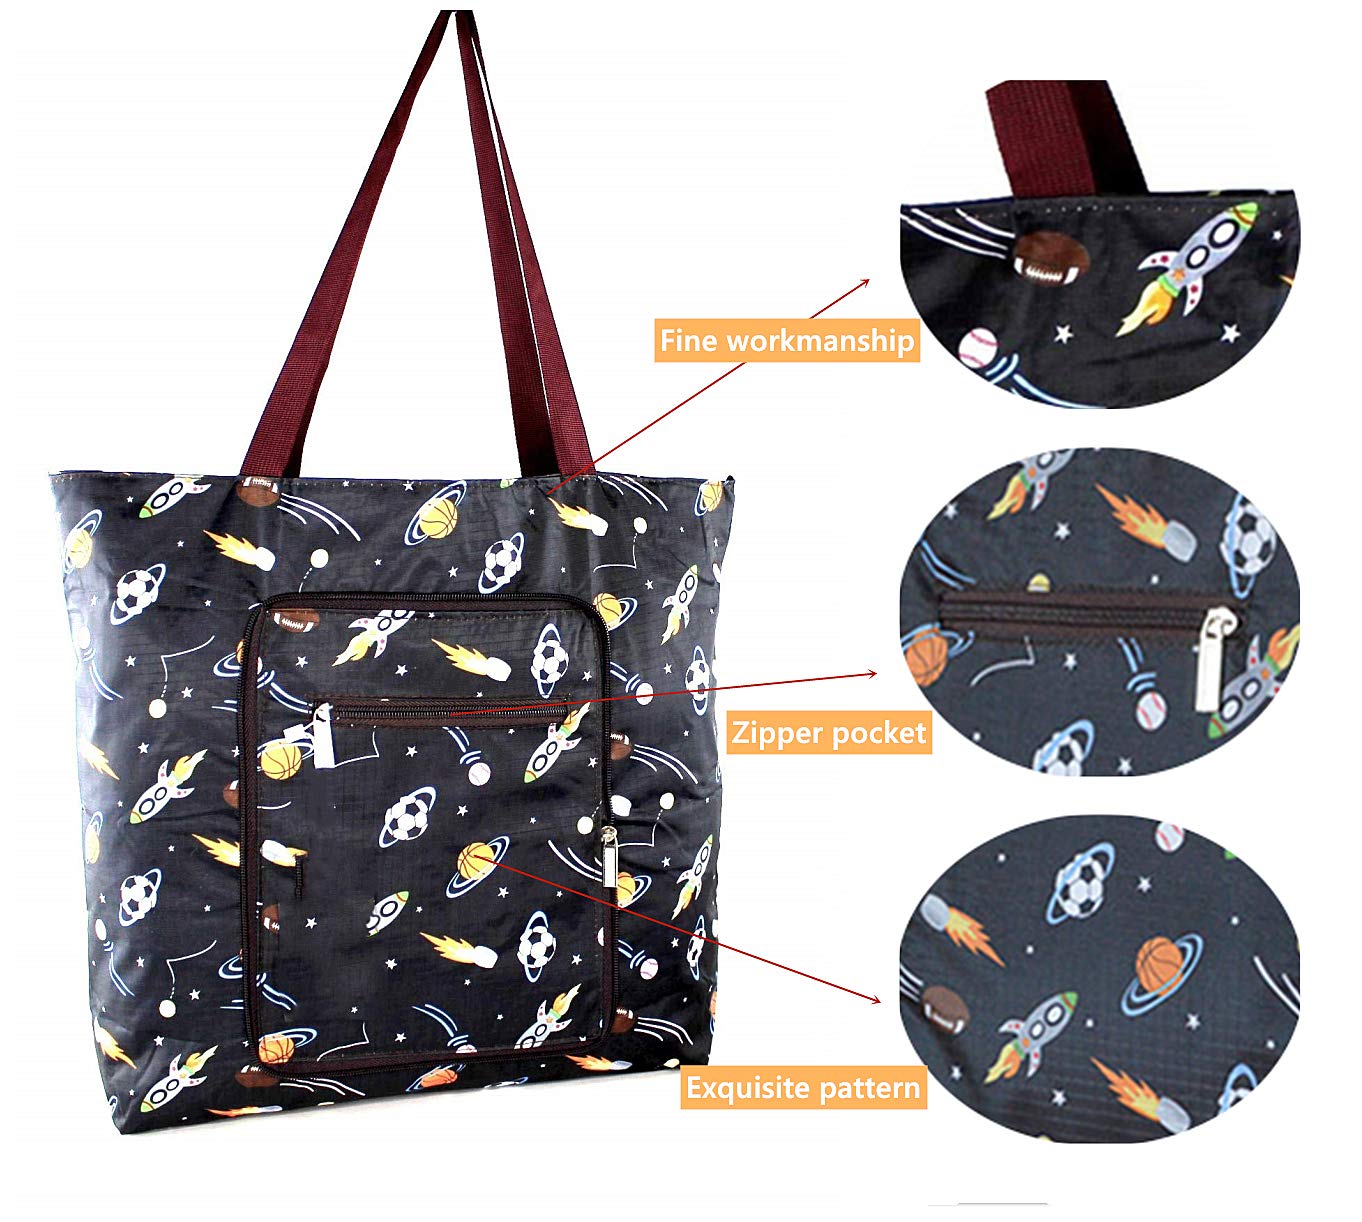 Reusable Shopping Bags Foldable Washable Waterproof Large Grocery Bags Heavy Duty With Zipper【3 Pack】 - CIVIBUY